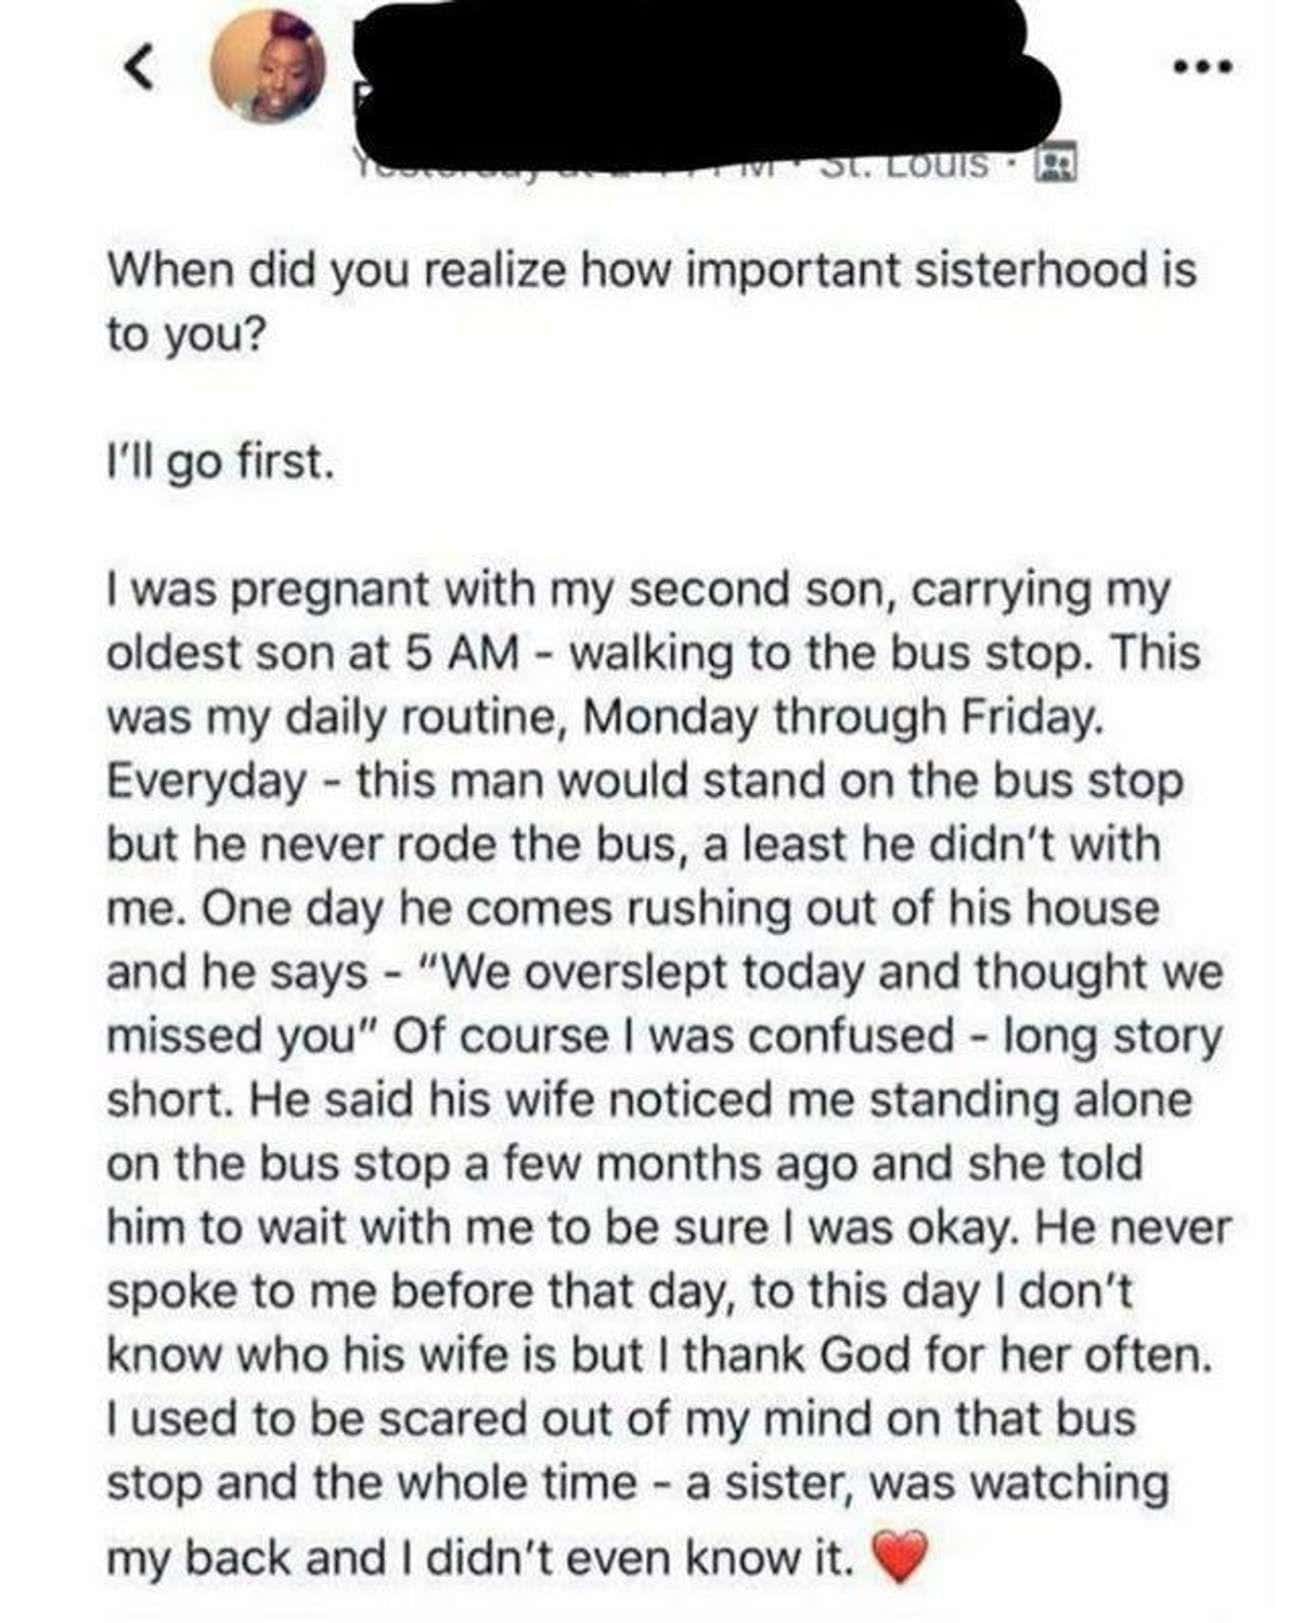 Strangers At Her Daily Bus Stop Had Her Back